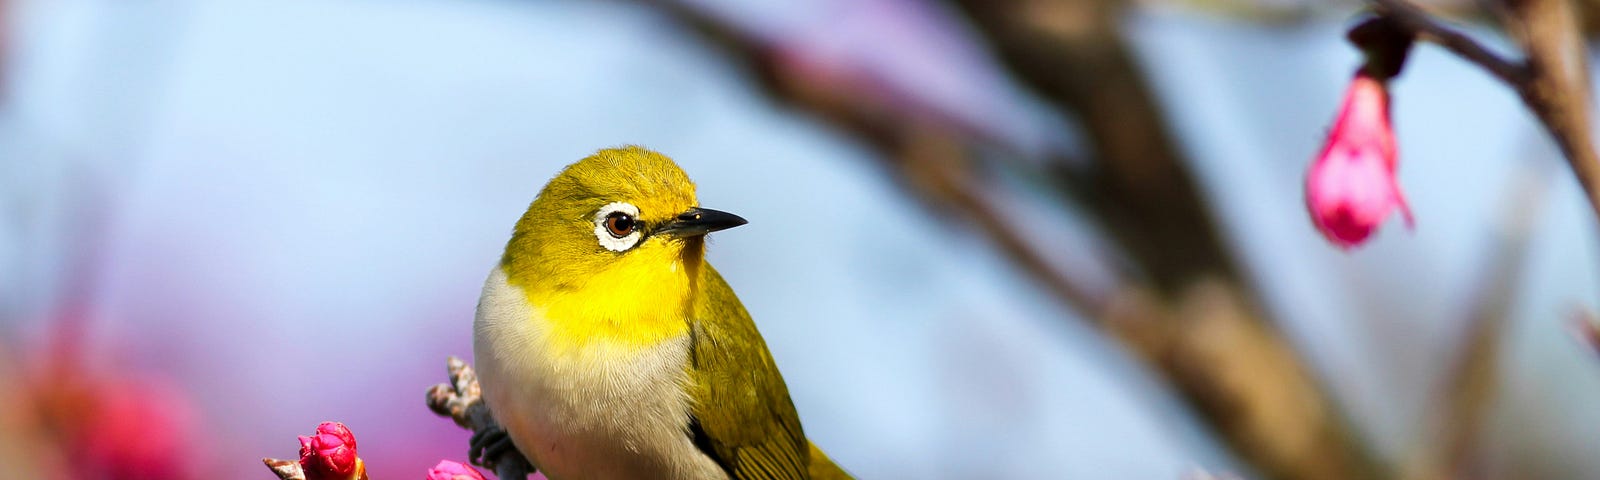 bird with a yellow head on a branch with pink buds.